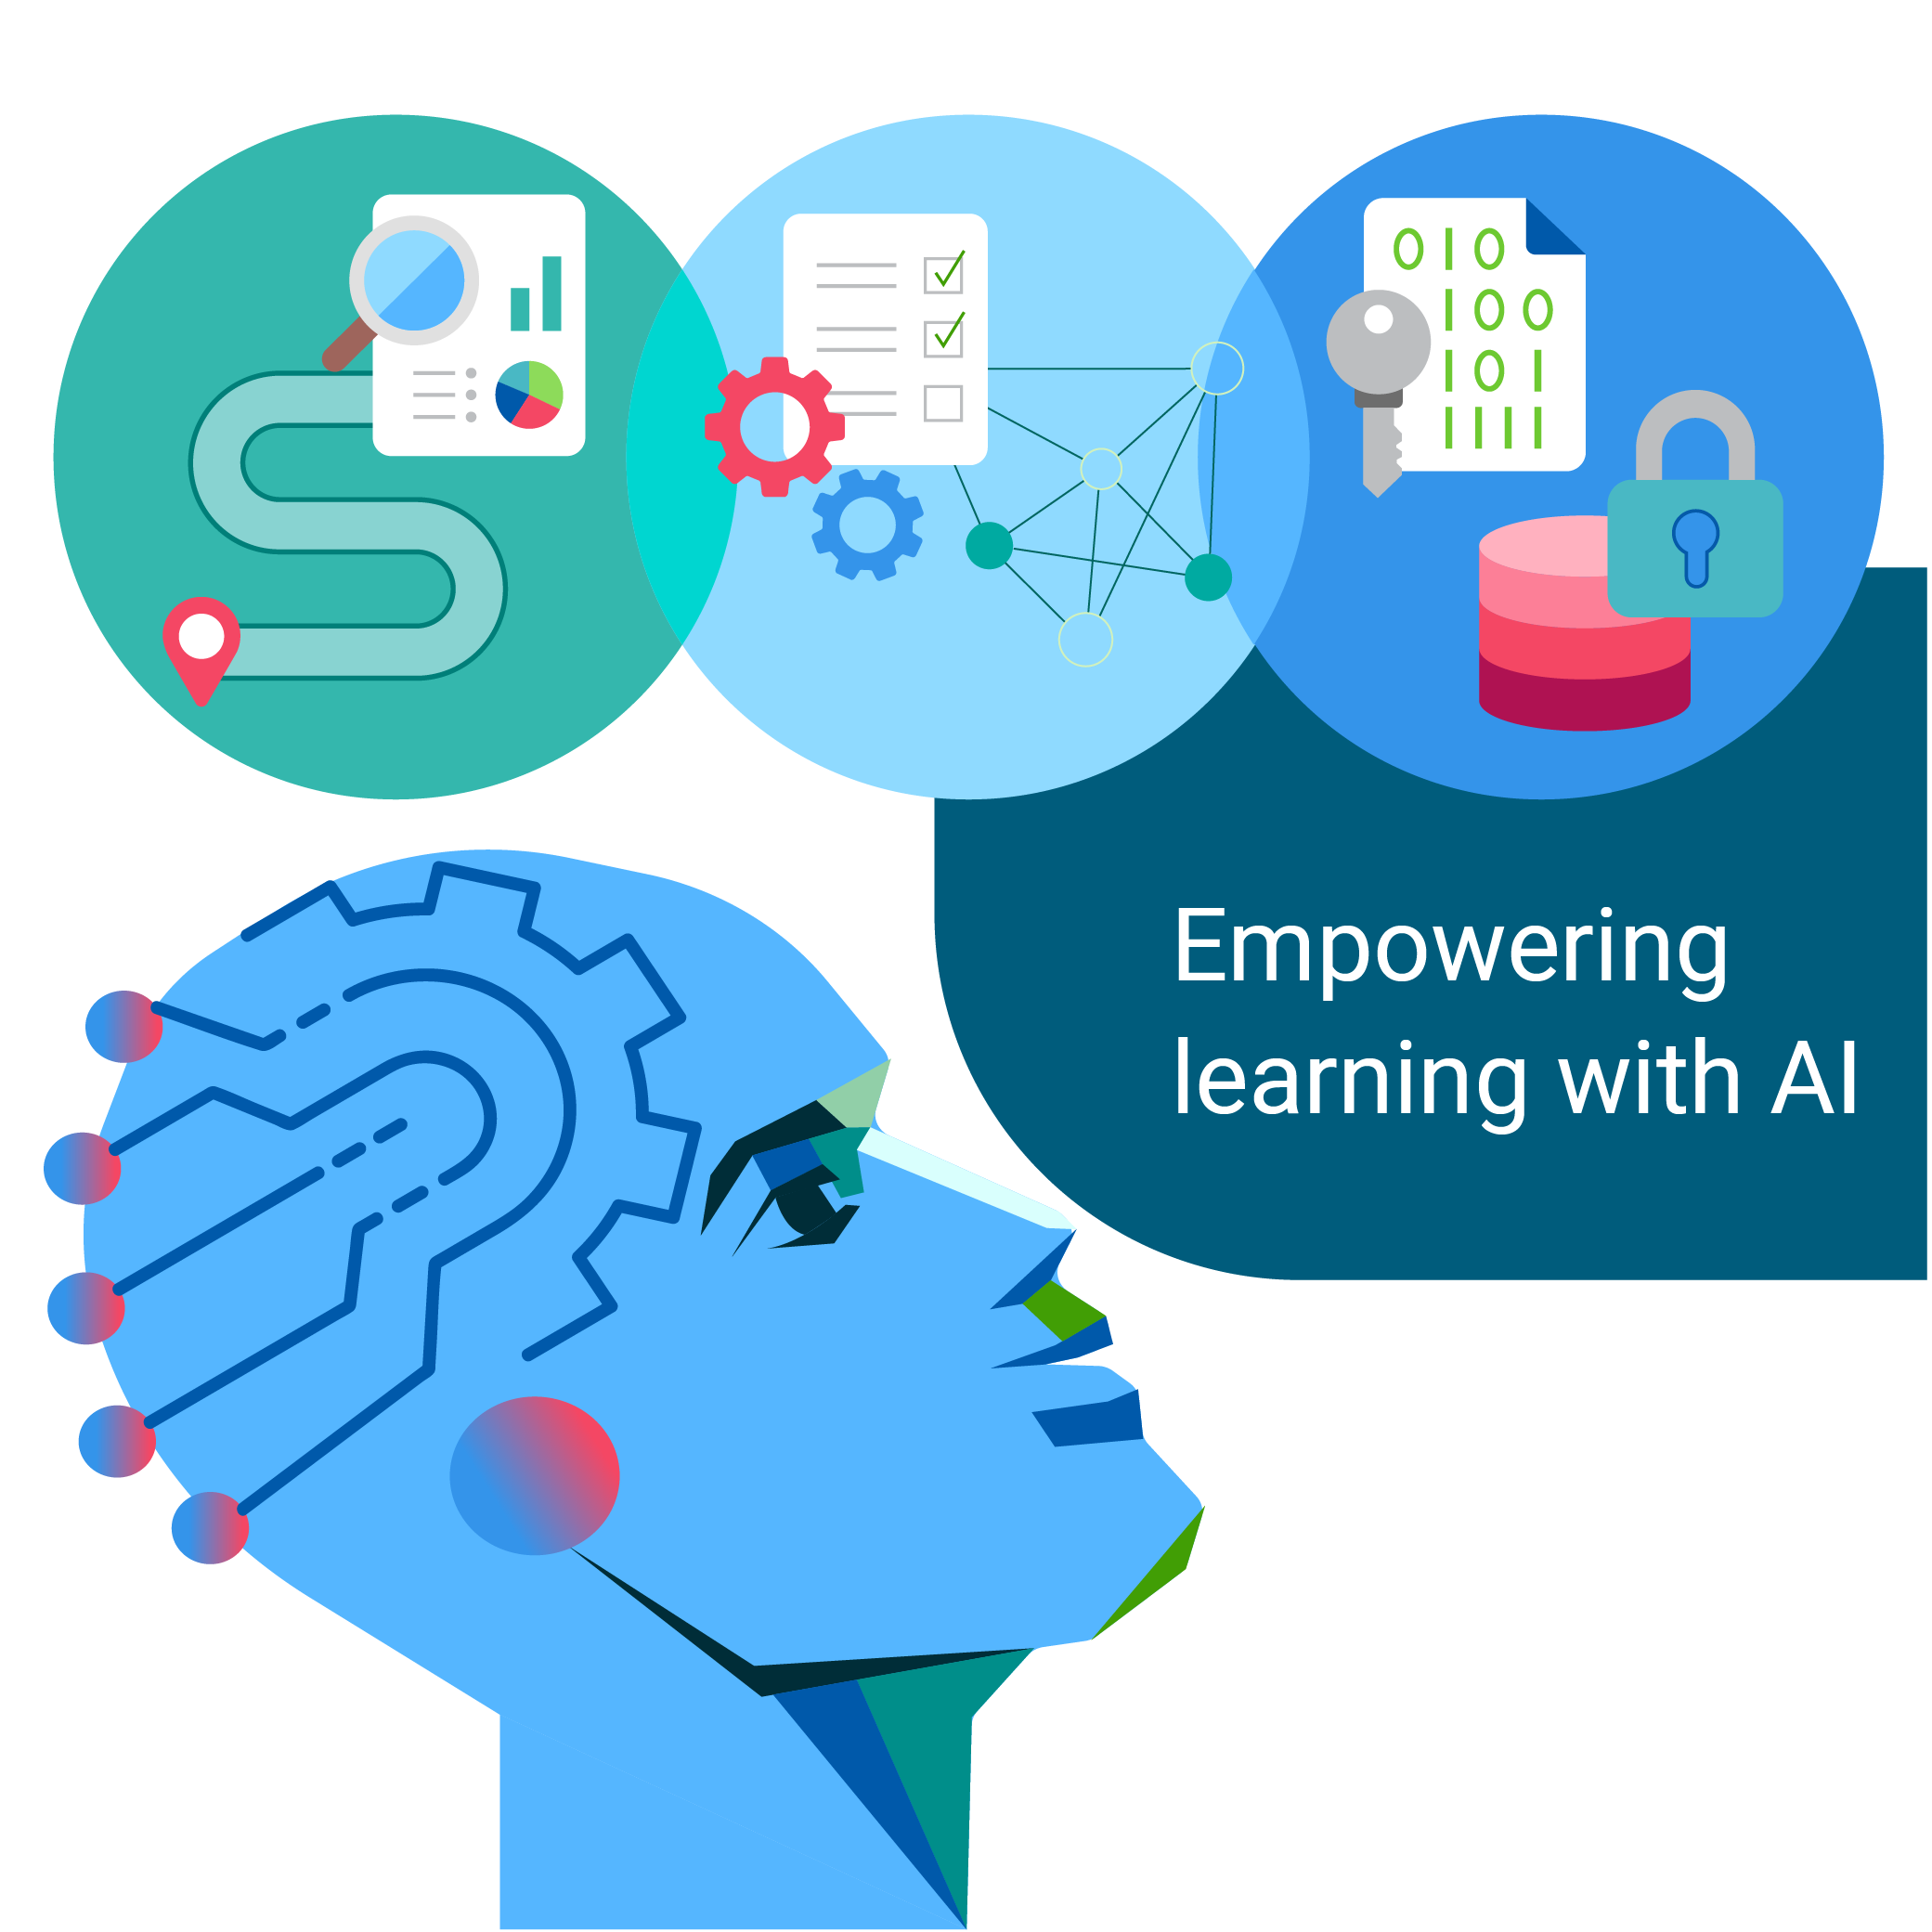 Empowering learning with AI